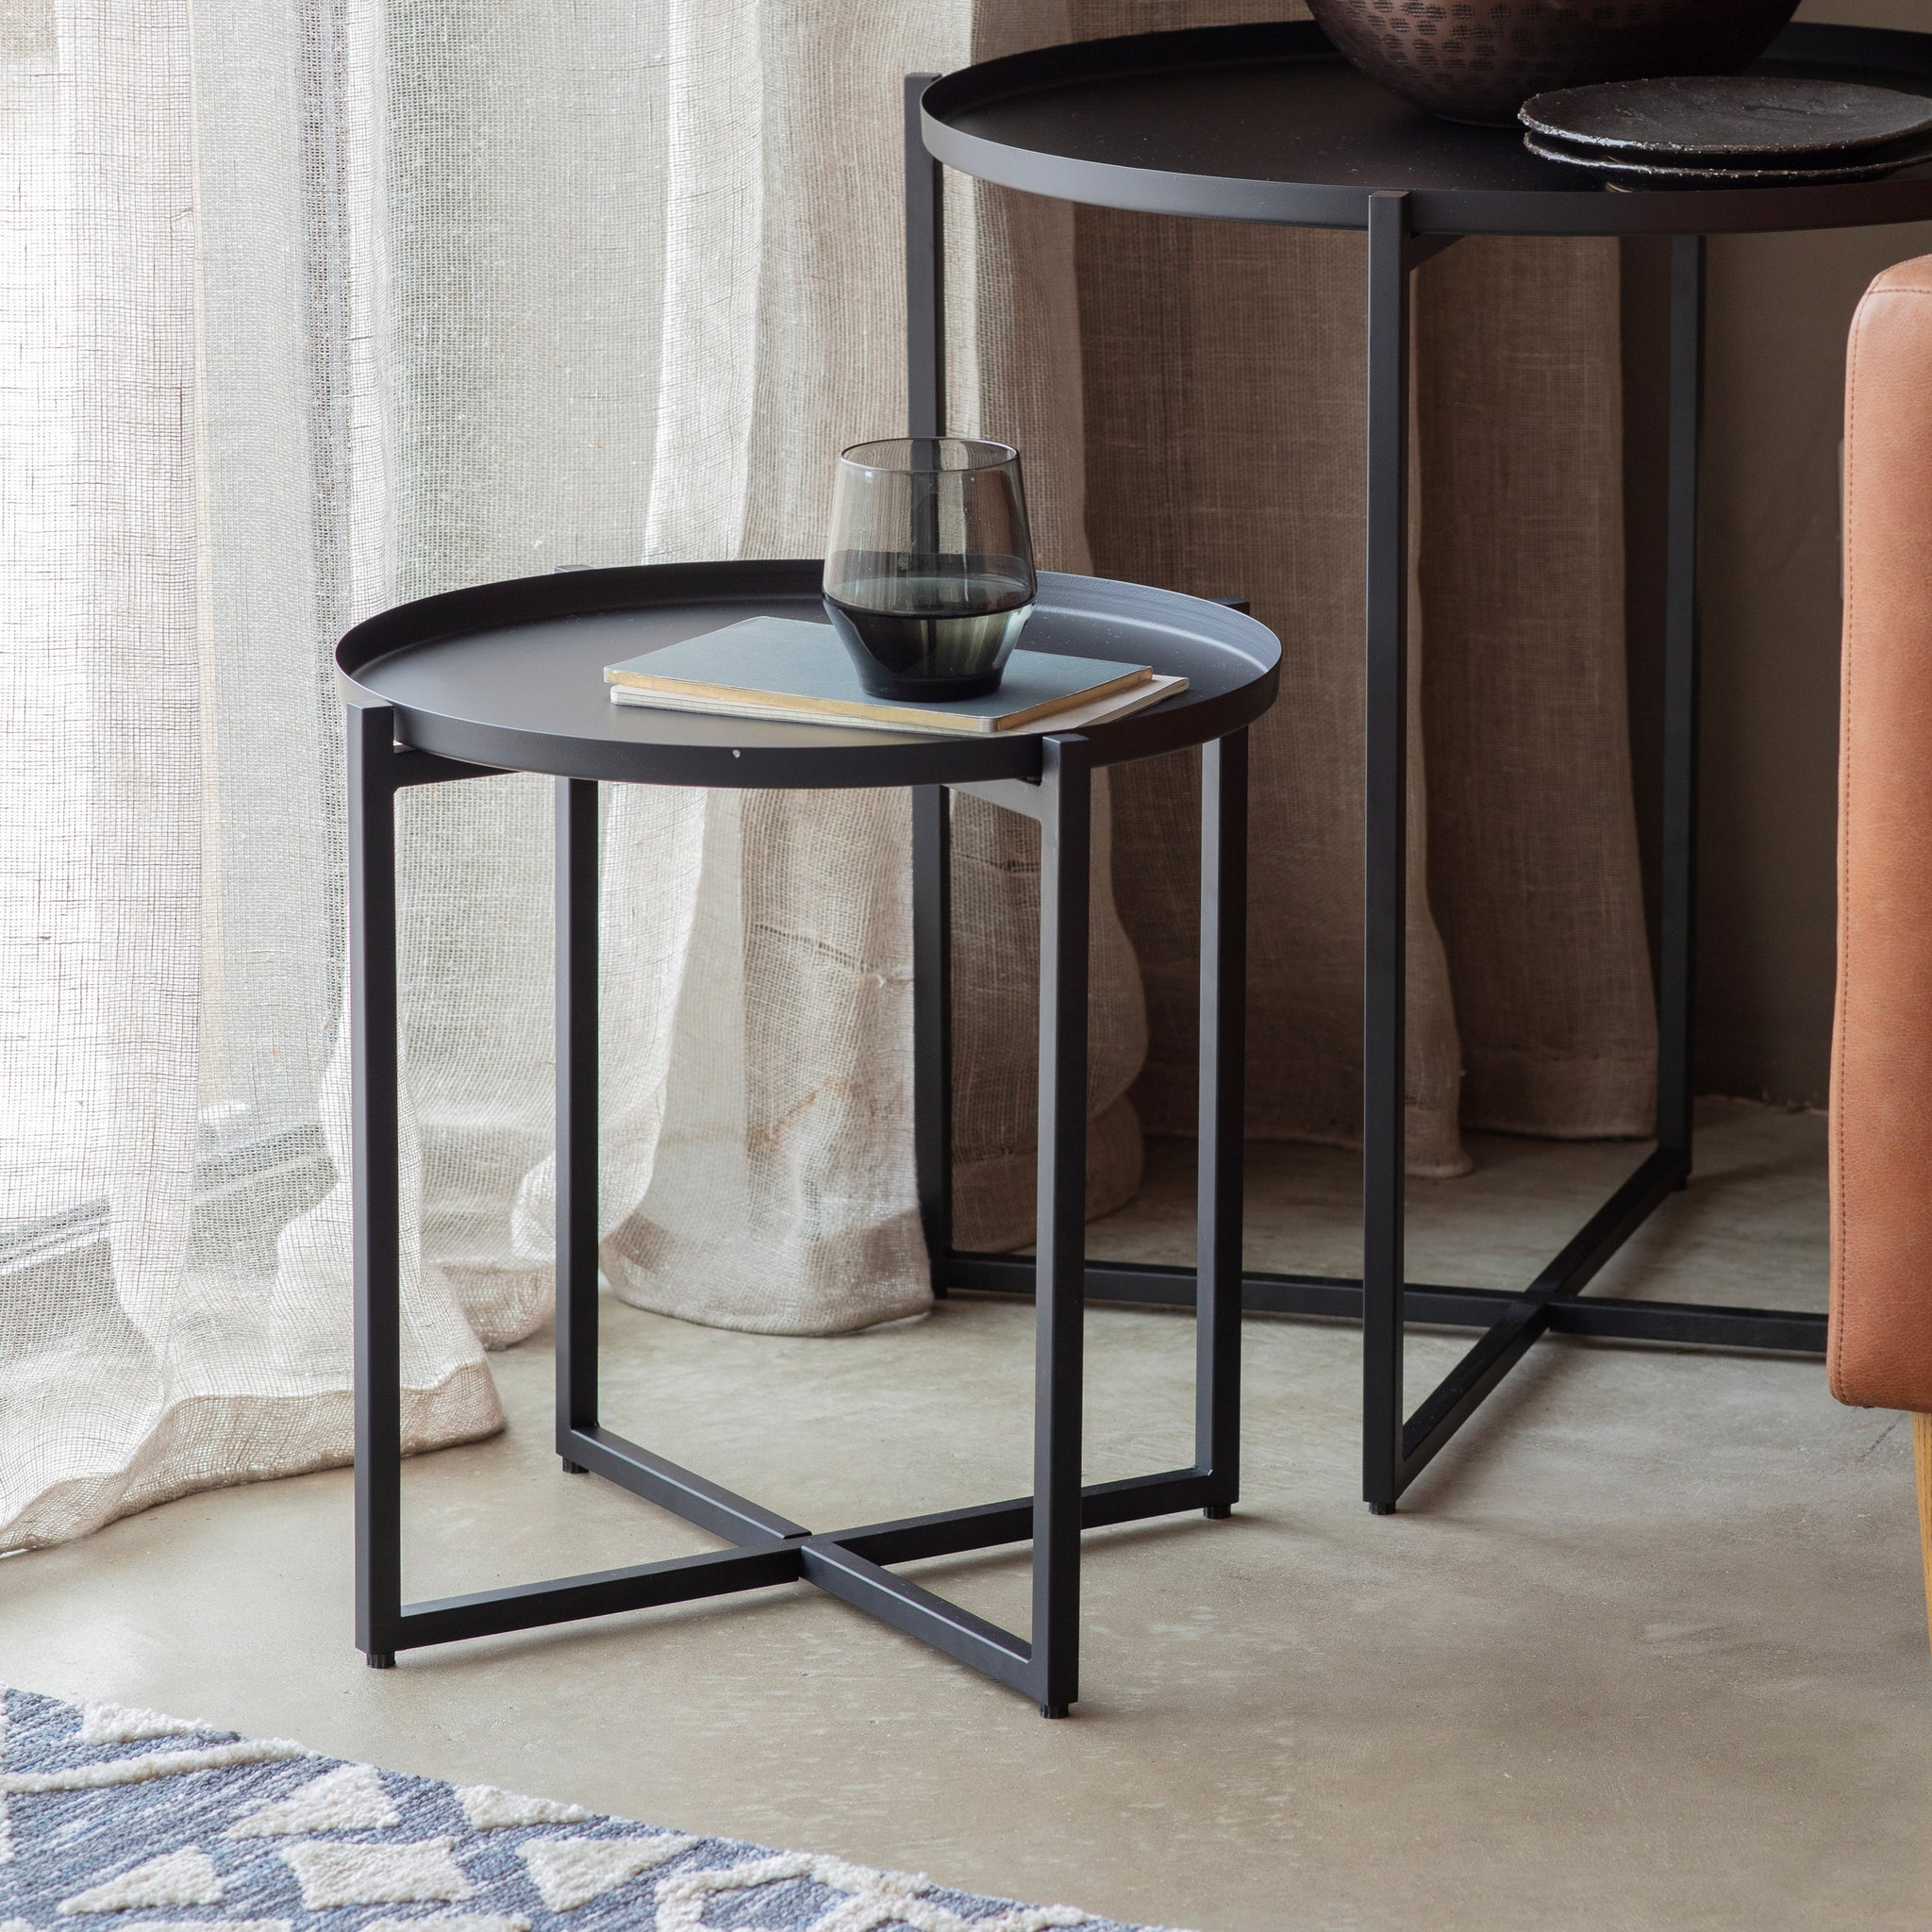 Malotra Side Table